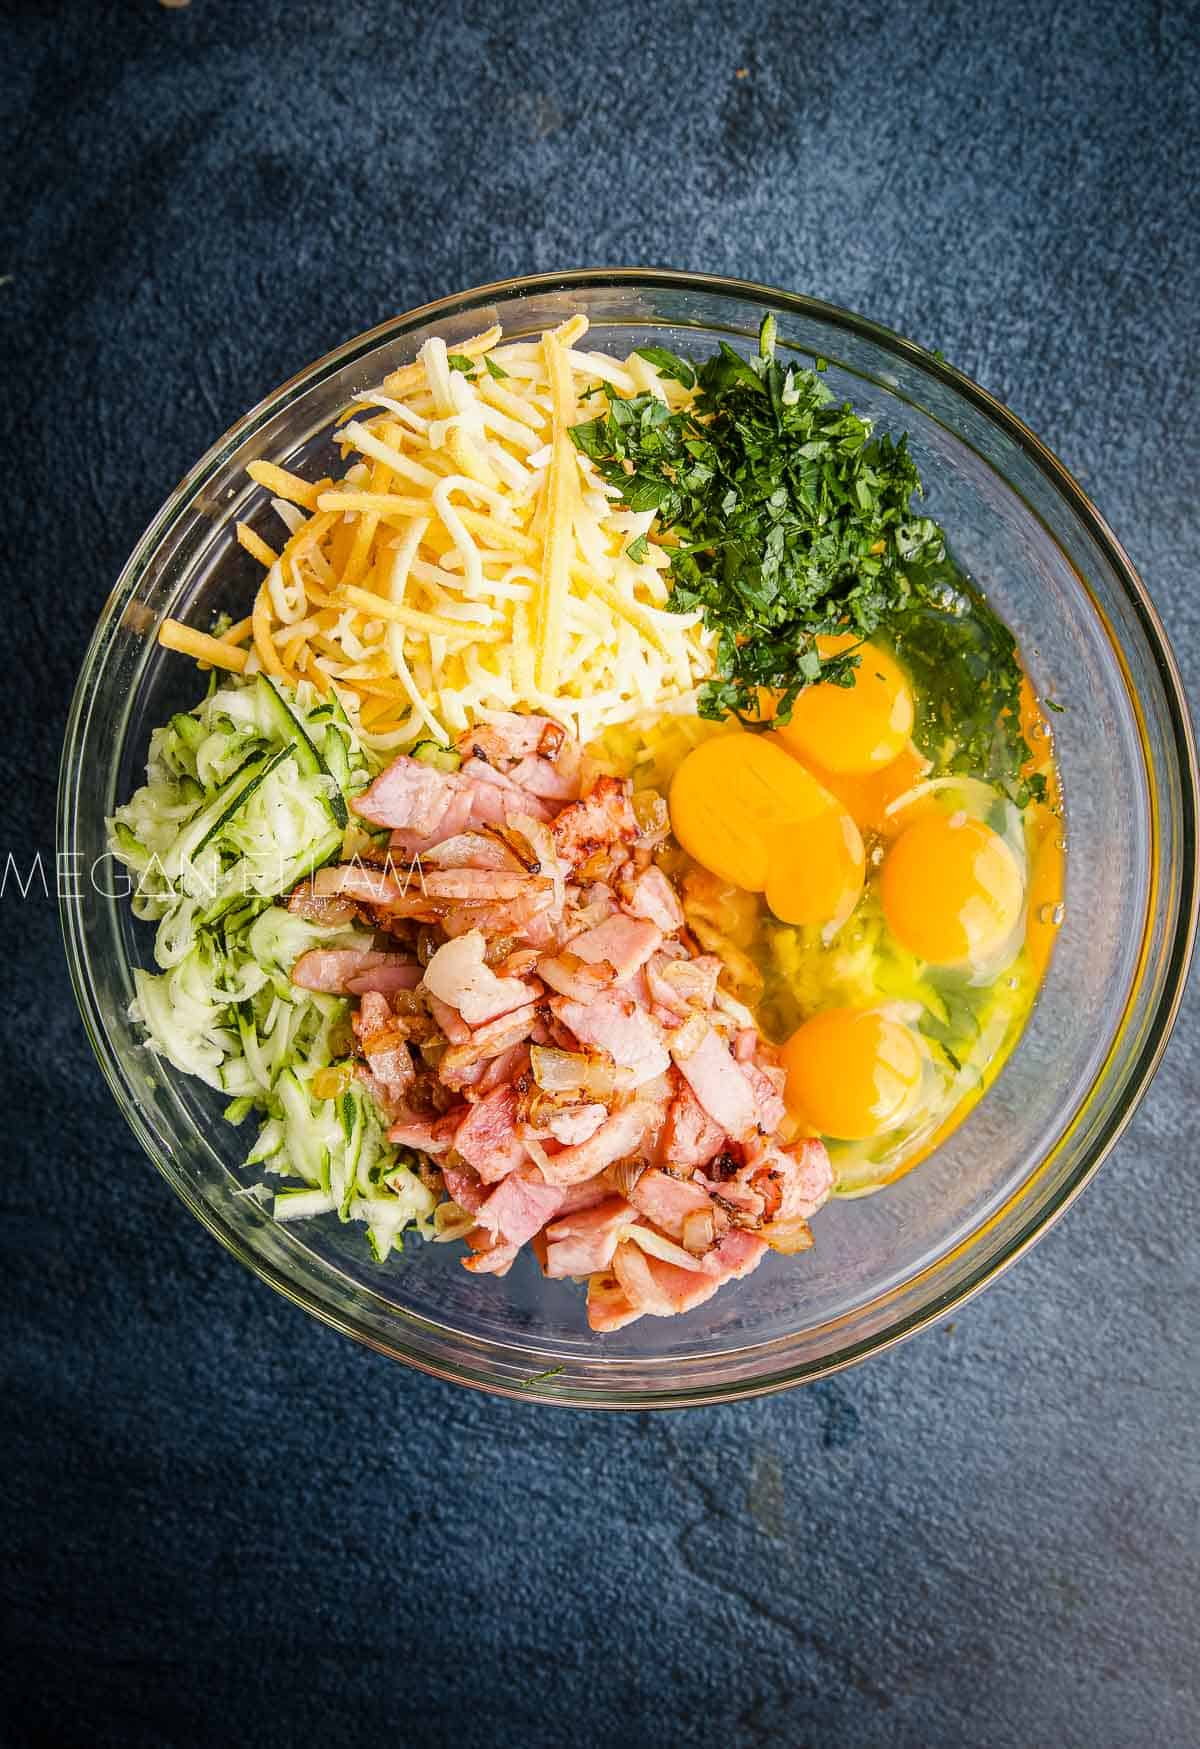 Bacon Quiche ingredients all in a glass bowl.